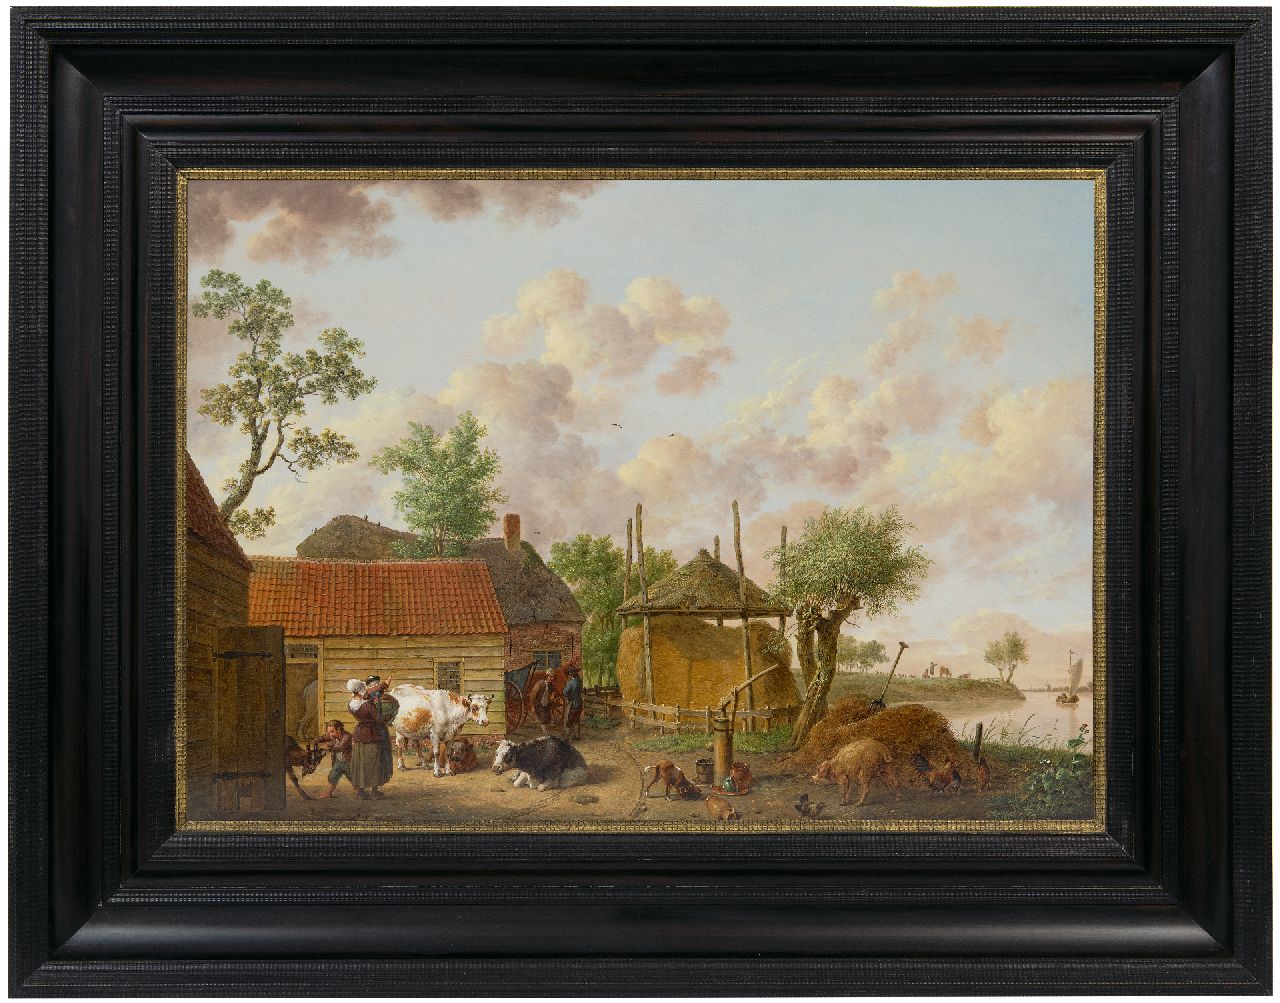 Ouwater I.  | Isaac Ouwater | Paintings offered for sale | Farmyard, oil on panel 42.8 x 60.2 cm, signed l.r.